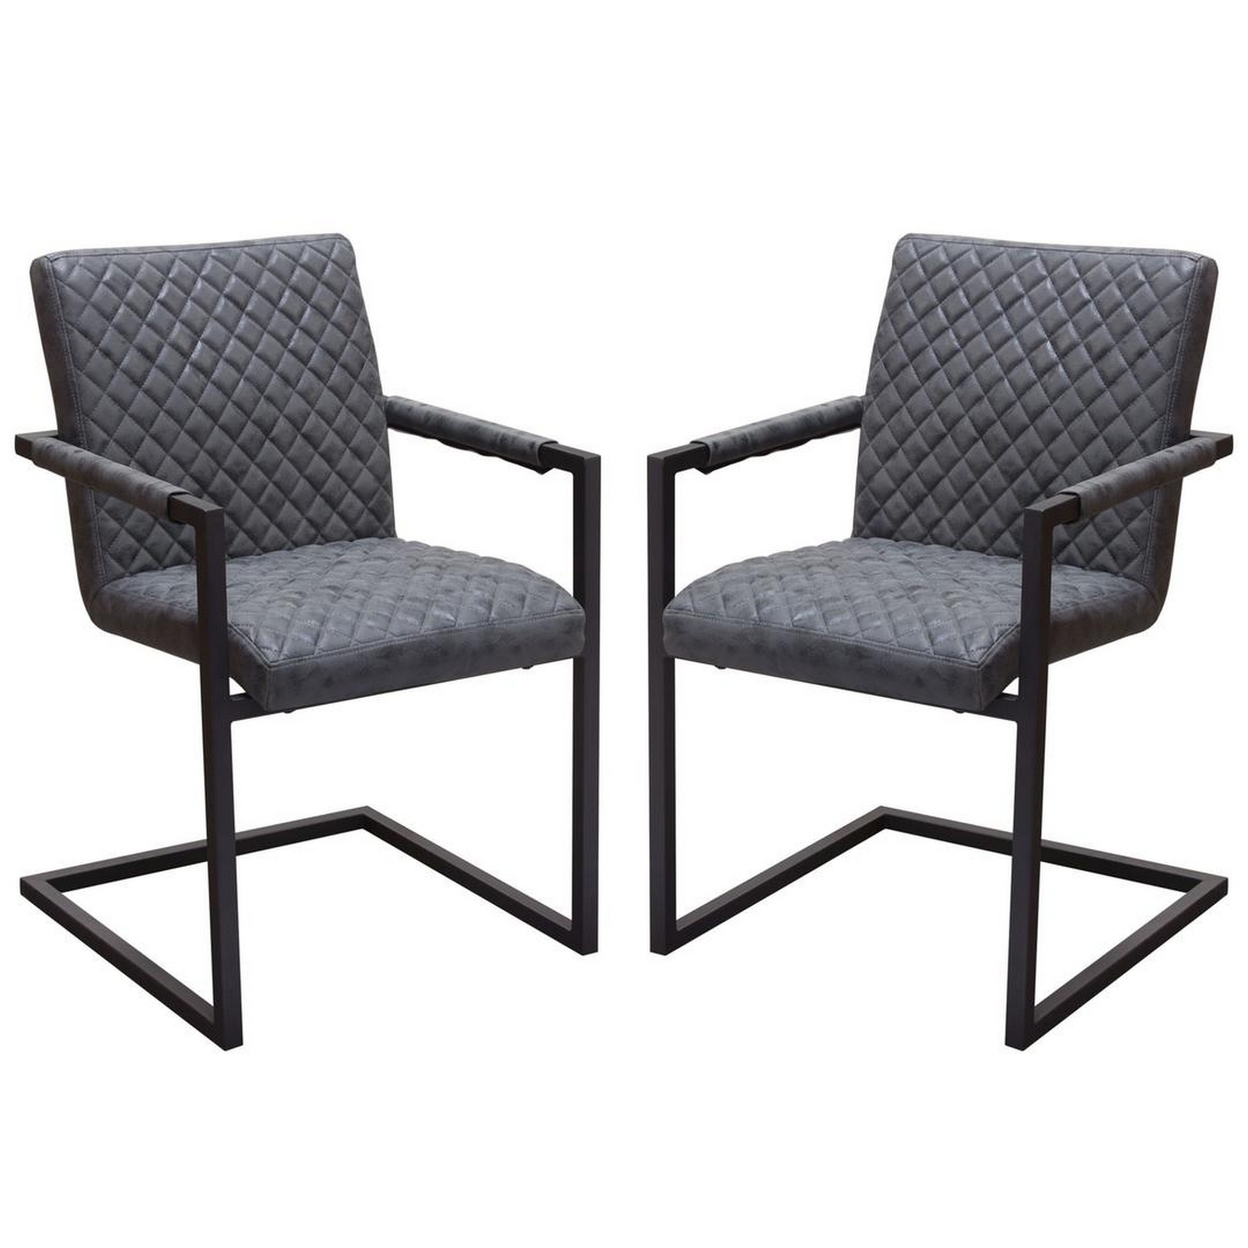 Diamond Tufted Leatherette Dining Chairs With Metal Cantilever Base, Gray And Black, Pack Of Two- Saltoro Sherpi